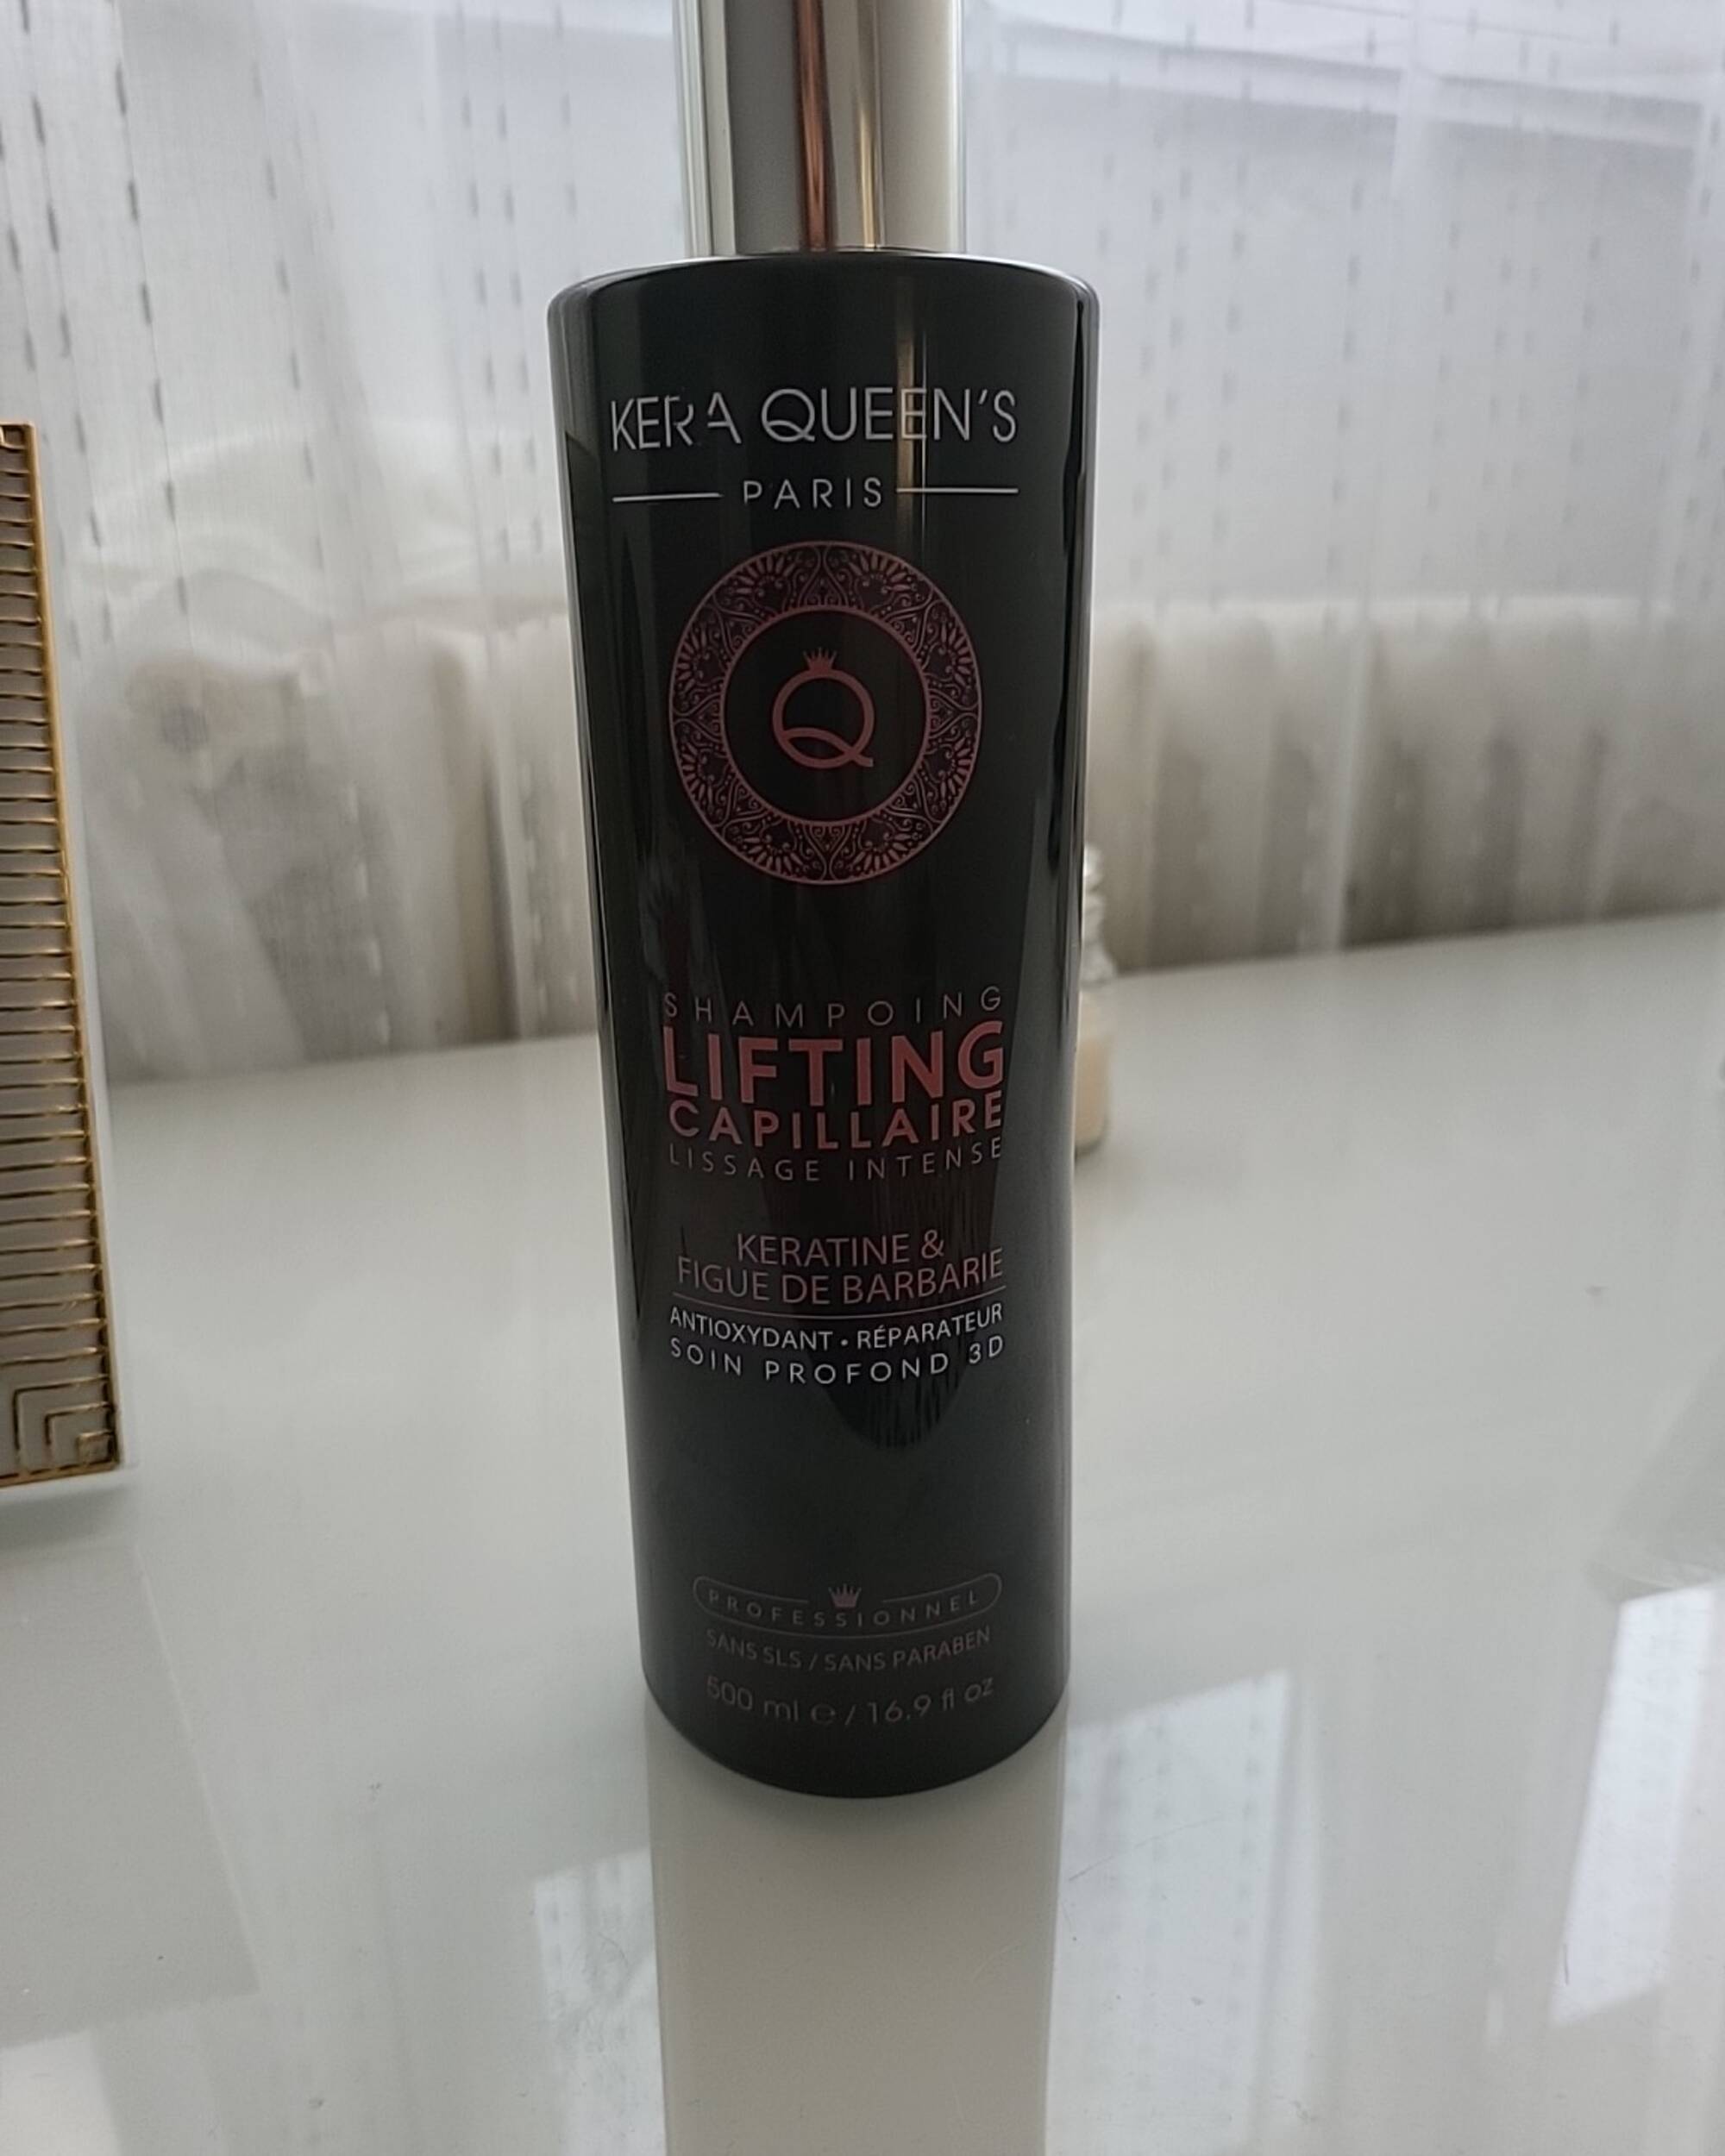 KERA QUEEN'S - Lifting capillaire - Shampoing